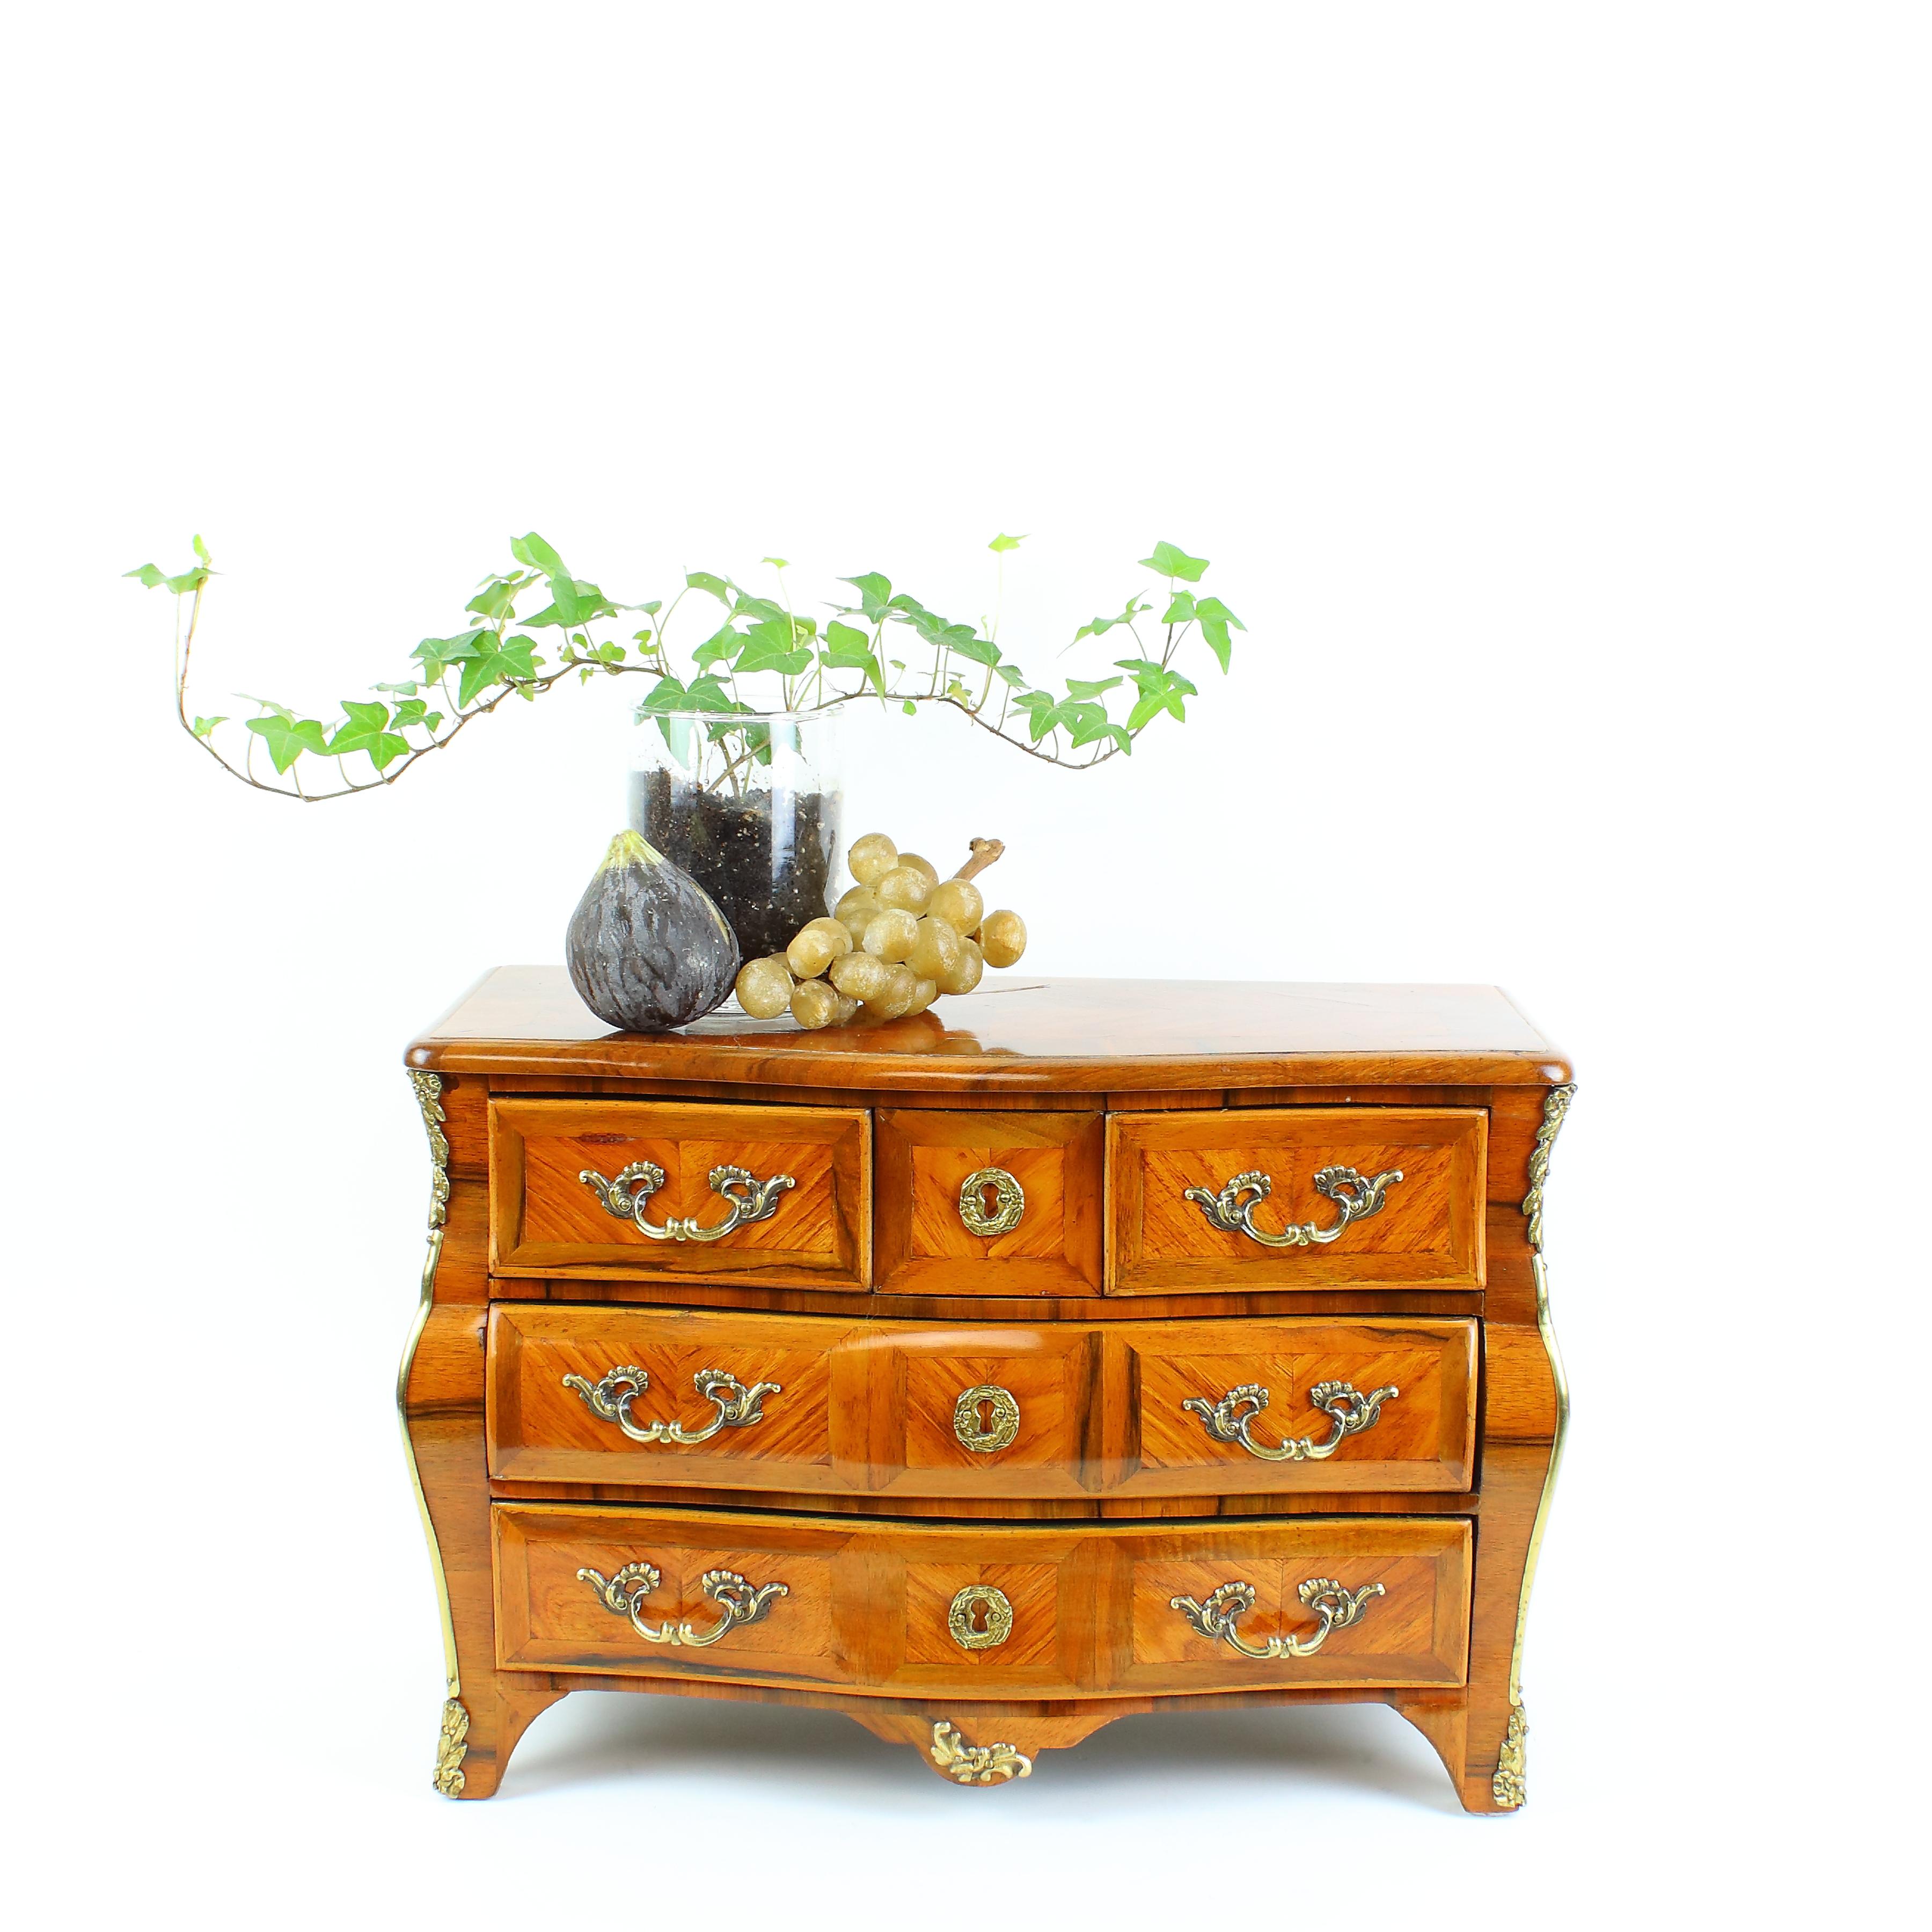 Louis XV style miniature chest of drawers or commode à la Parisienne

A Louis XV style walnut marquetry commode or chest of drawers of tomb-shaped form, the serpentine top echoed by the serpentine front apron, with two large drawers below two